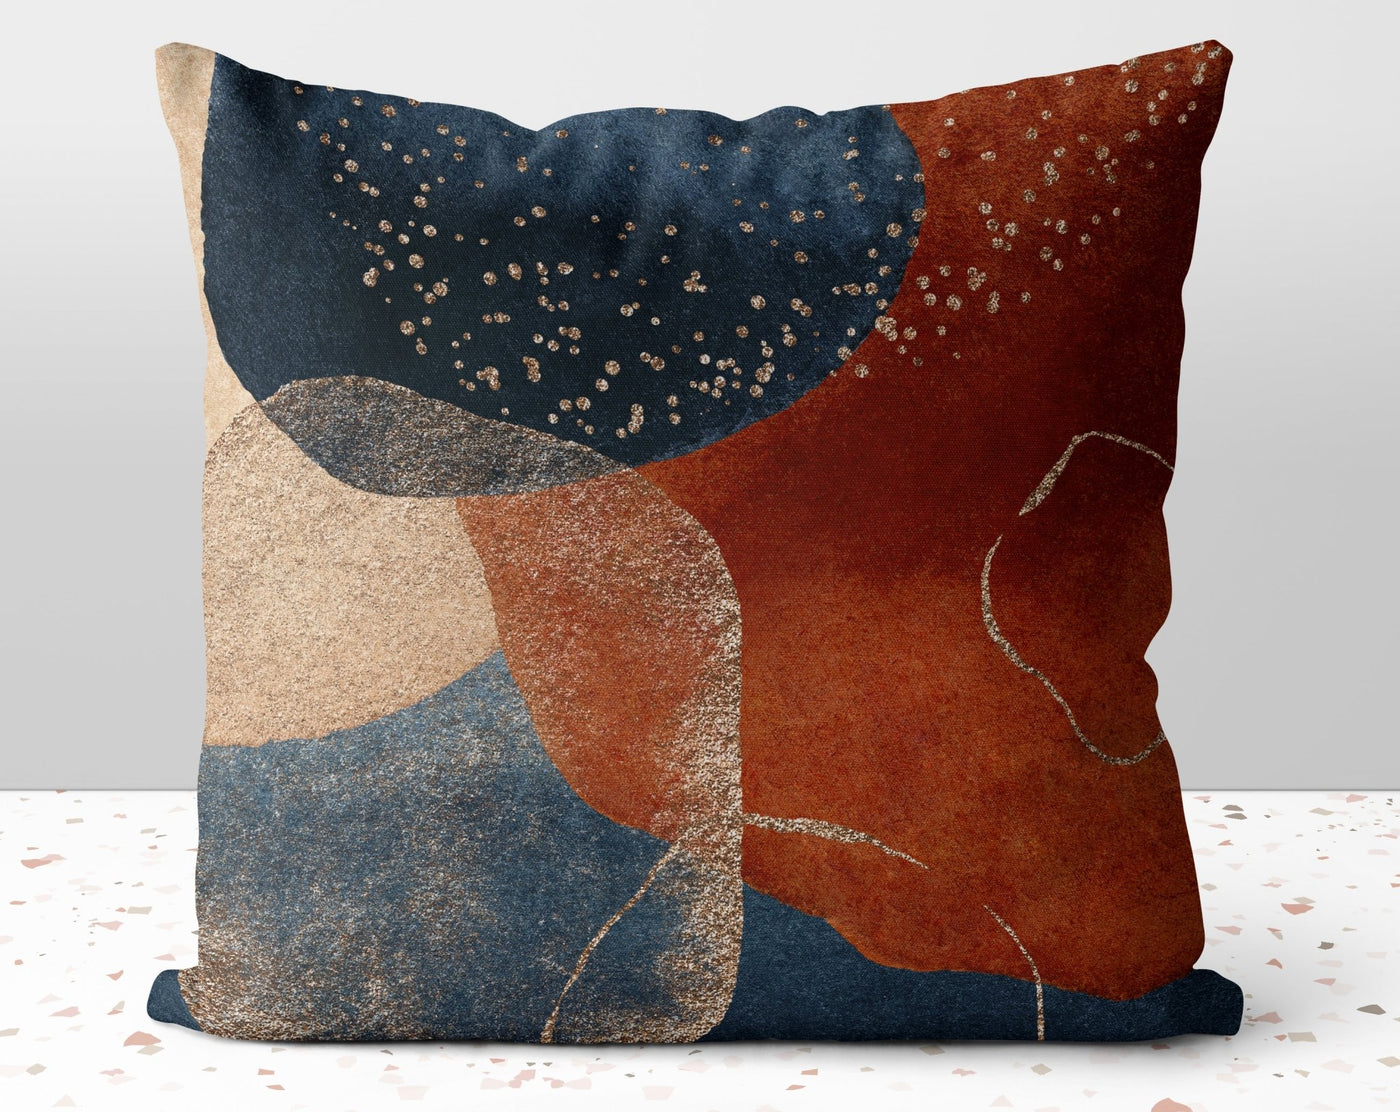 Elegant Glam Orange Blue Square Pillow with Gold Printed Accents with Cover Throw with Insert - Cush Potato Pillows